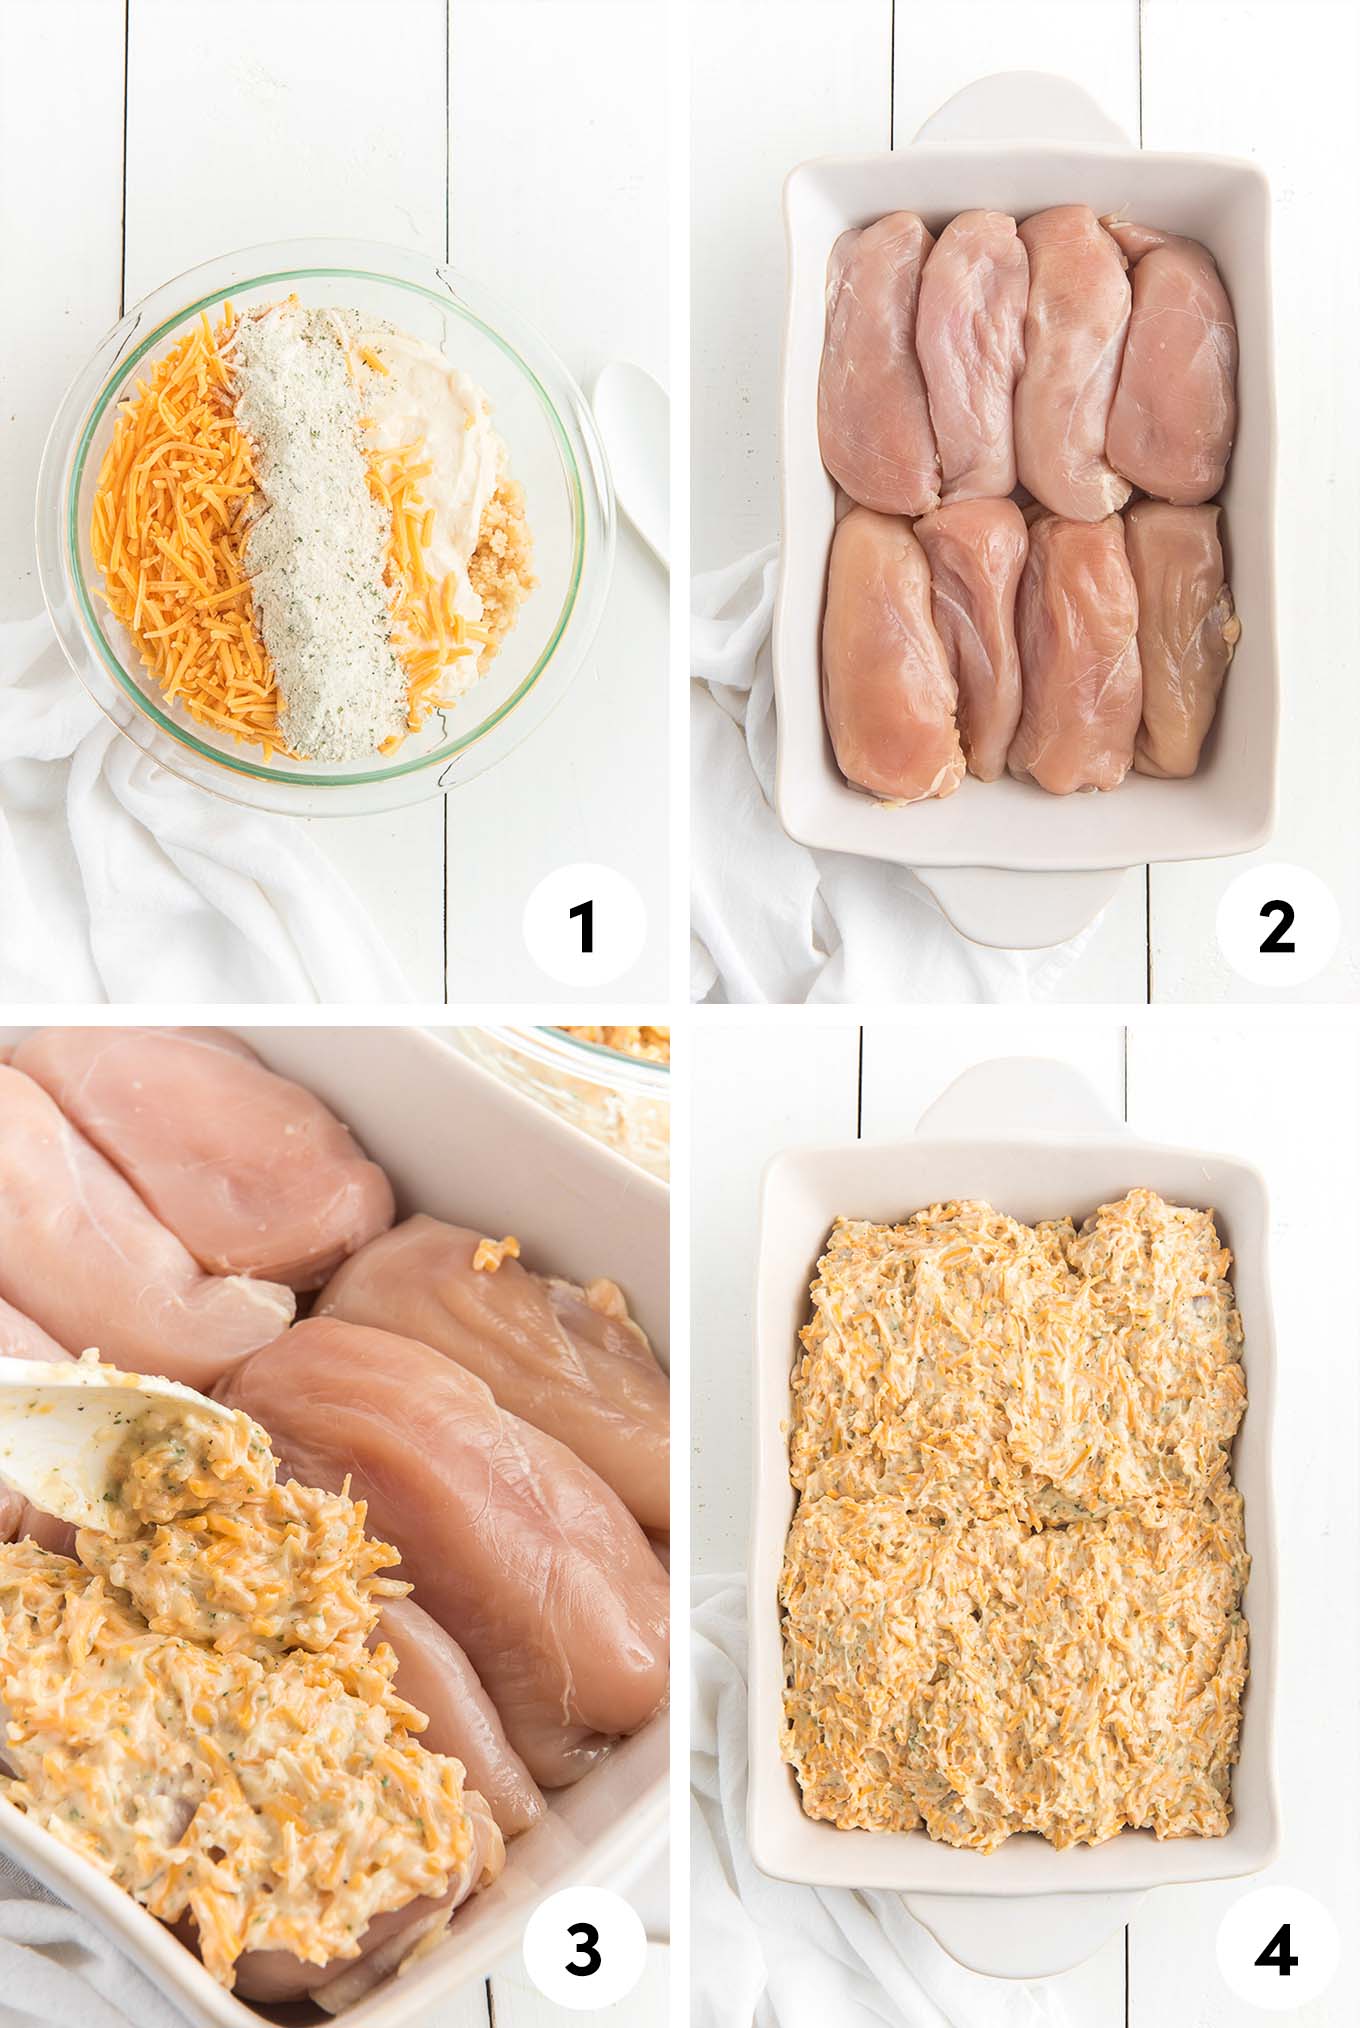 A collage of images showing the major steps for making cheesy ranch chicken including mixing the ranch cheese topping to the chicken in the baking dish and finally adding the topping over the chicken pieces.